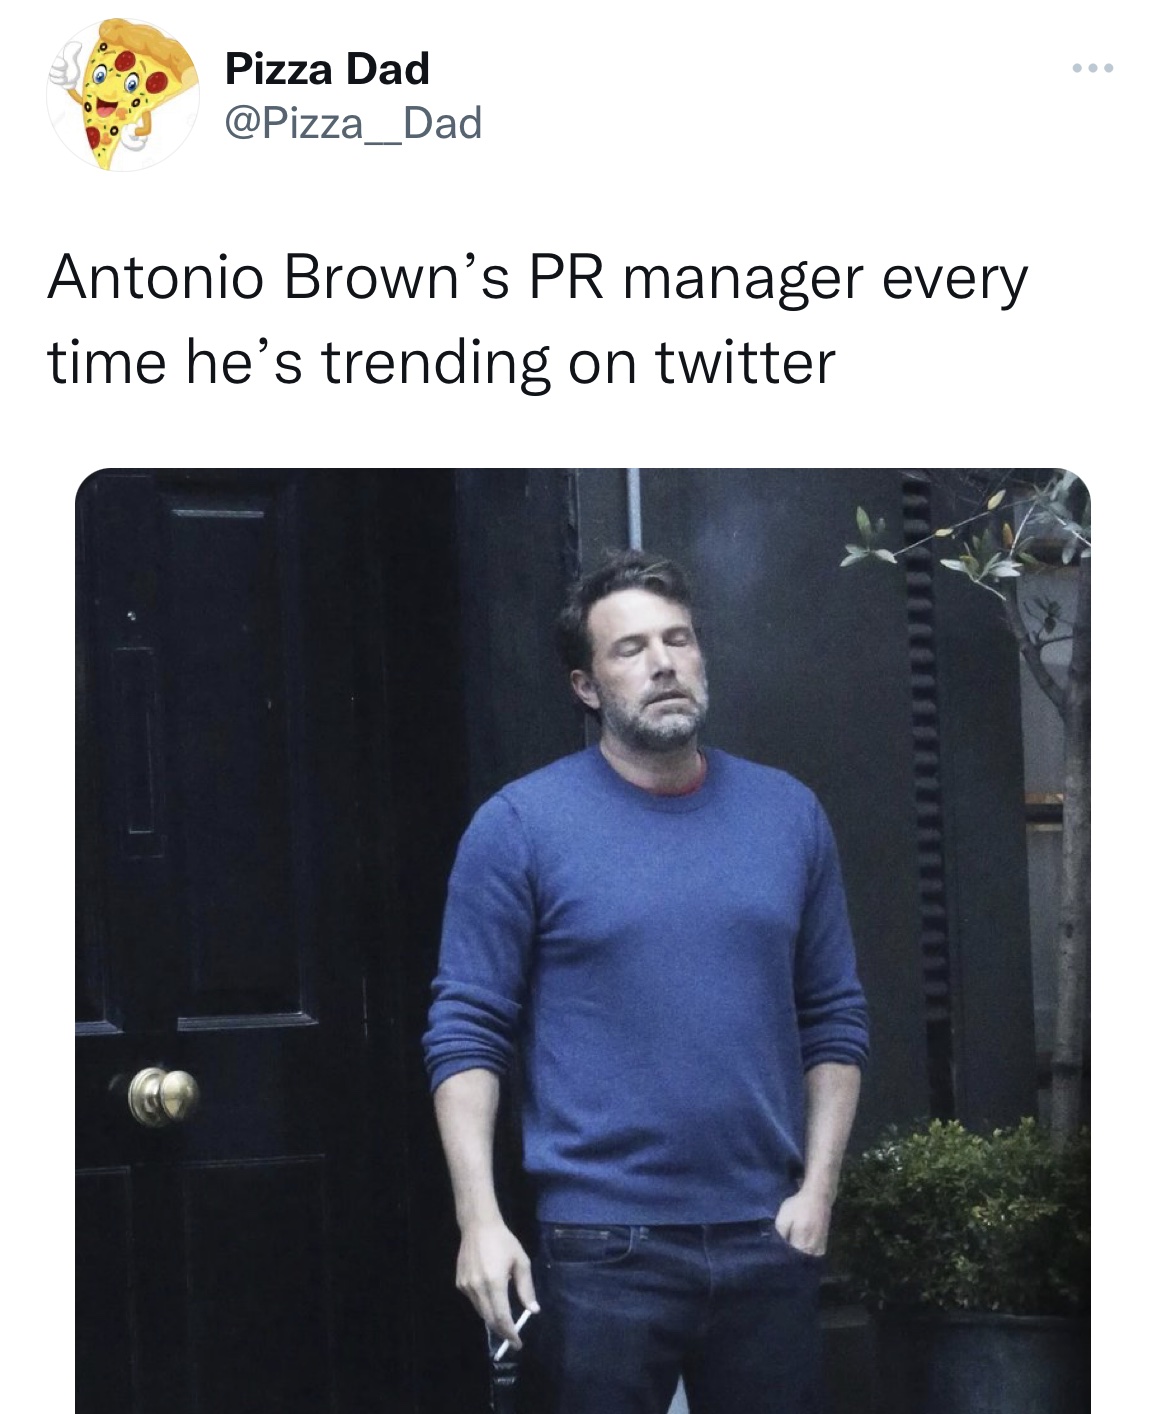 tweets roasting celebs - shoulder - Pizza Dad Antonio Brown's Pr manager every time he's trending on twitter